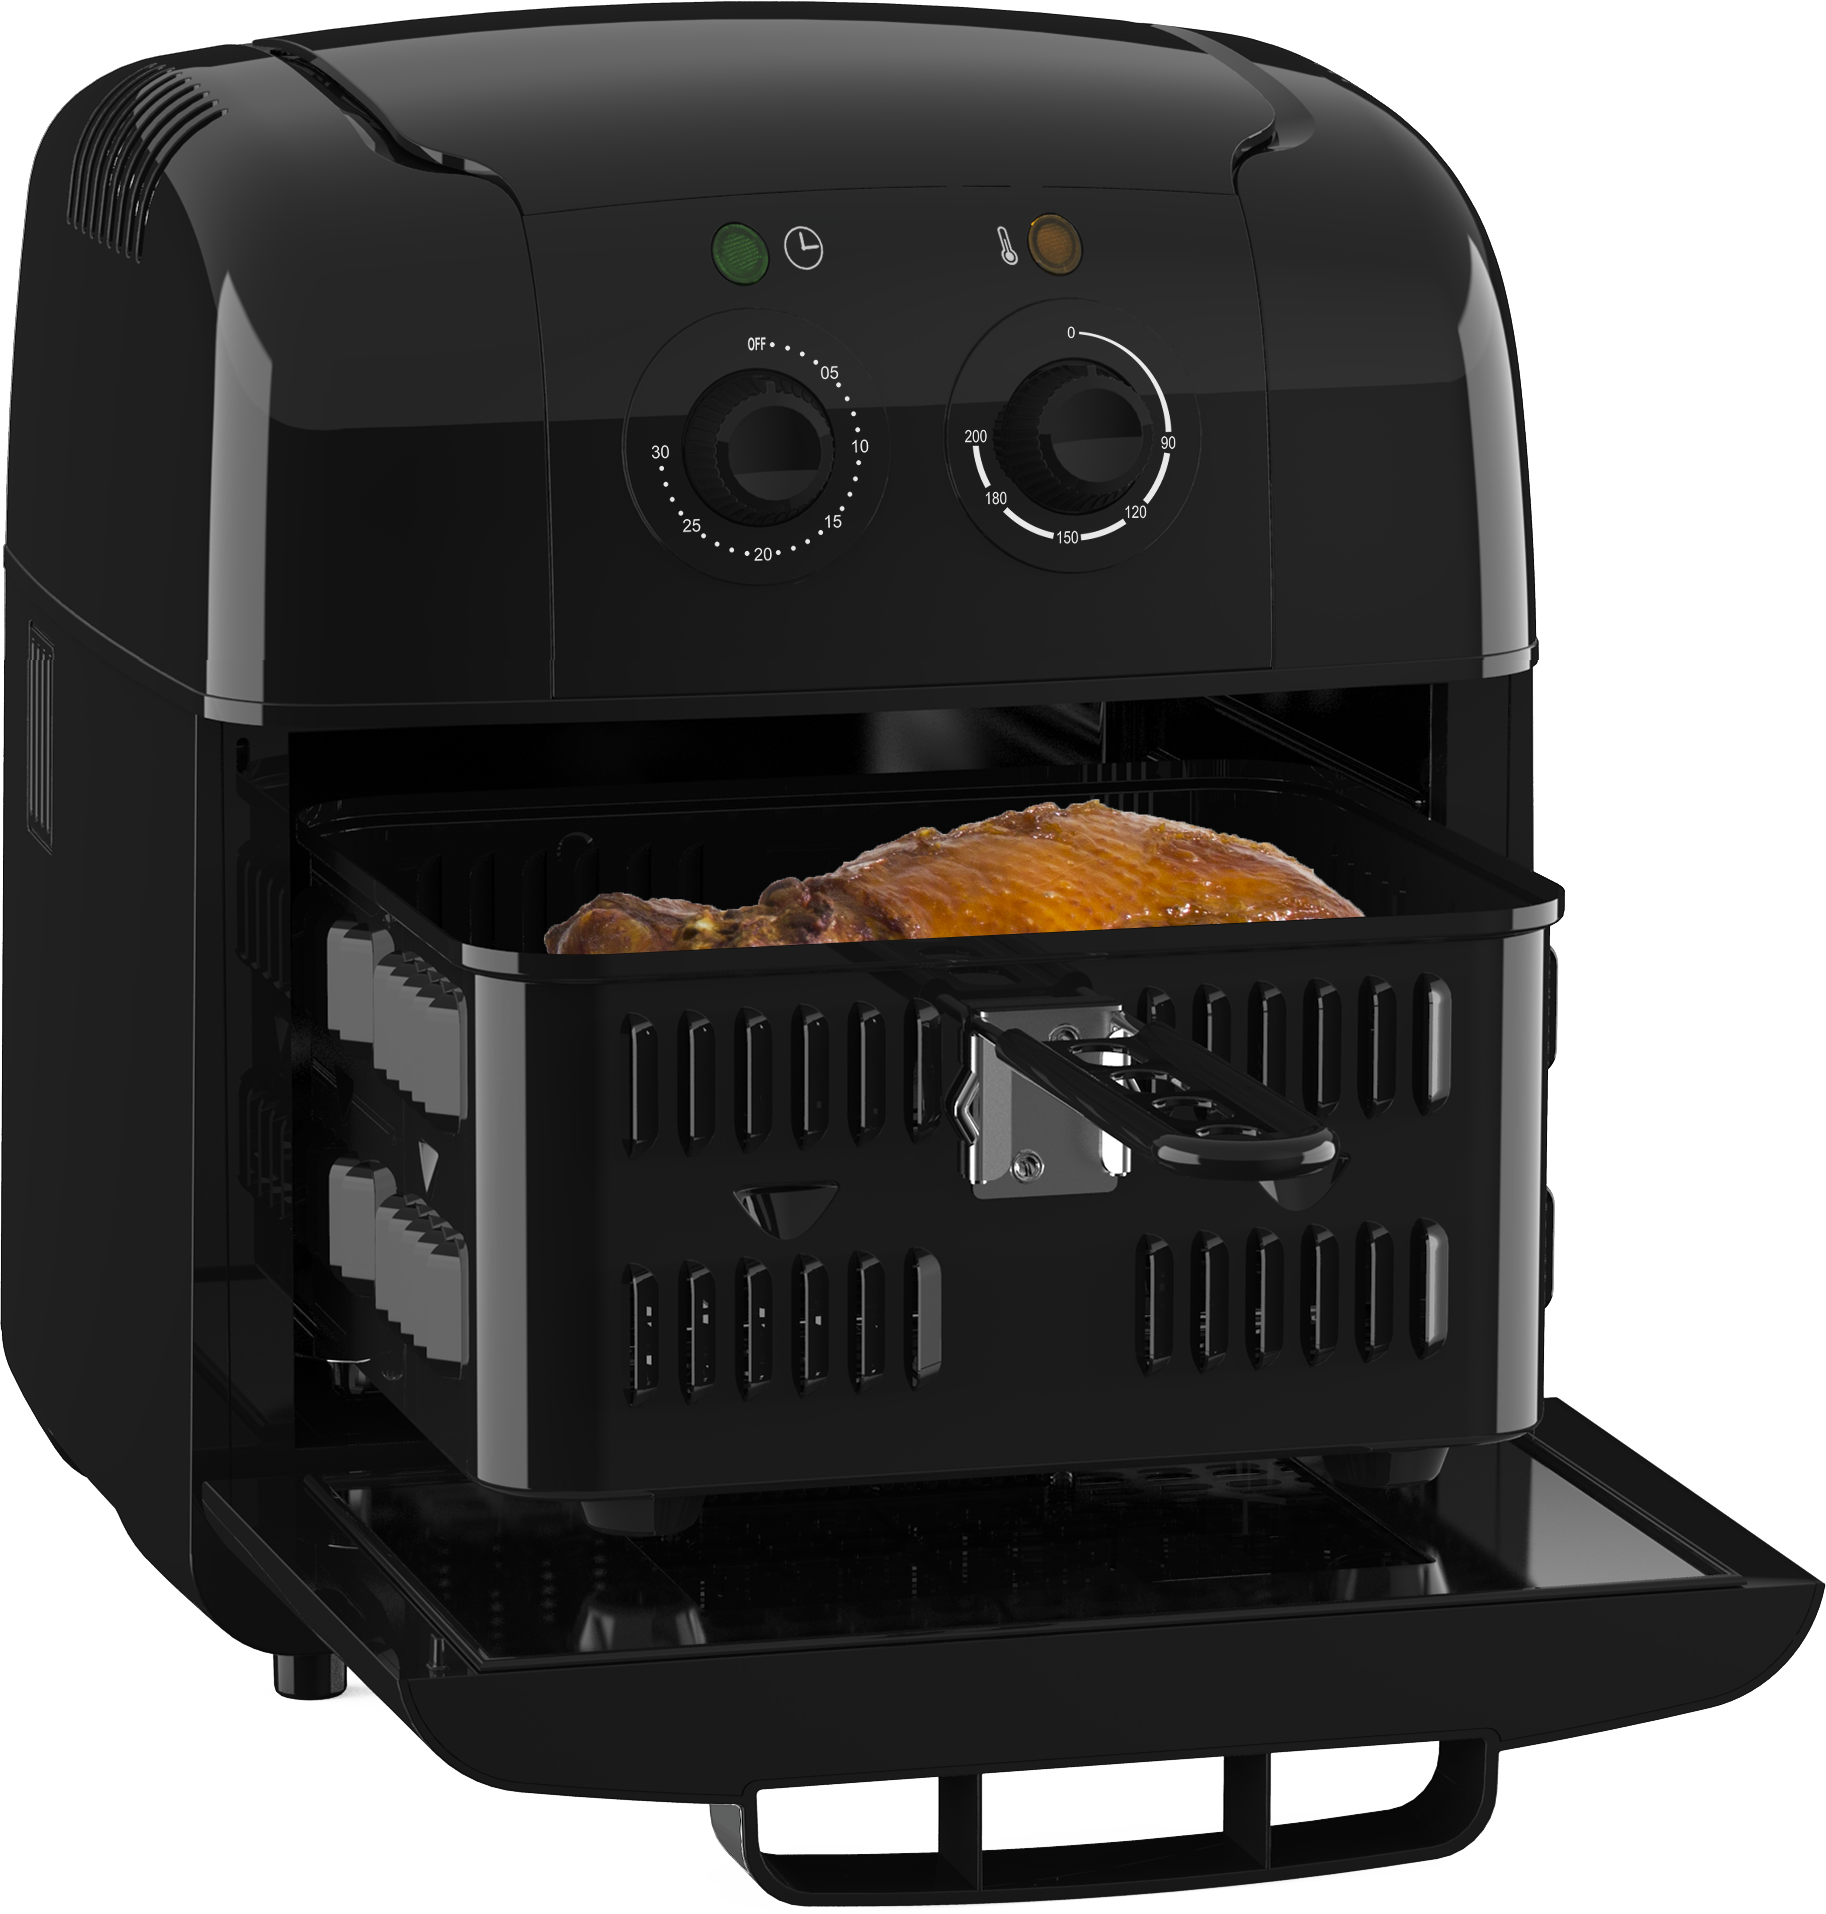 Air fryer,heating airfryer healthy oilless cooker large 10L capacity oven fryer,oil-free